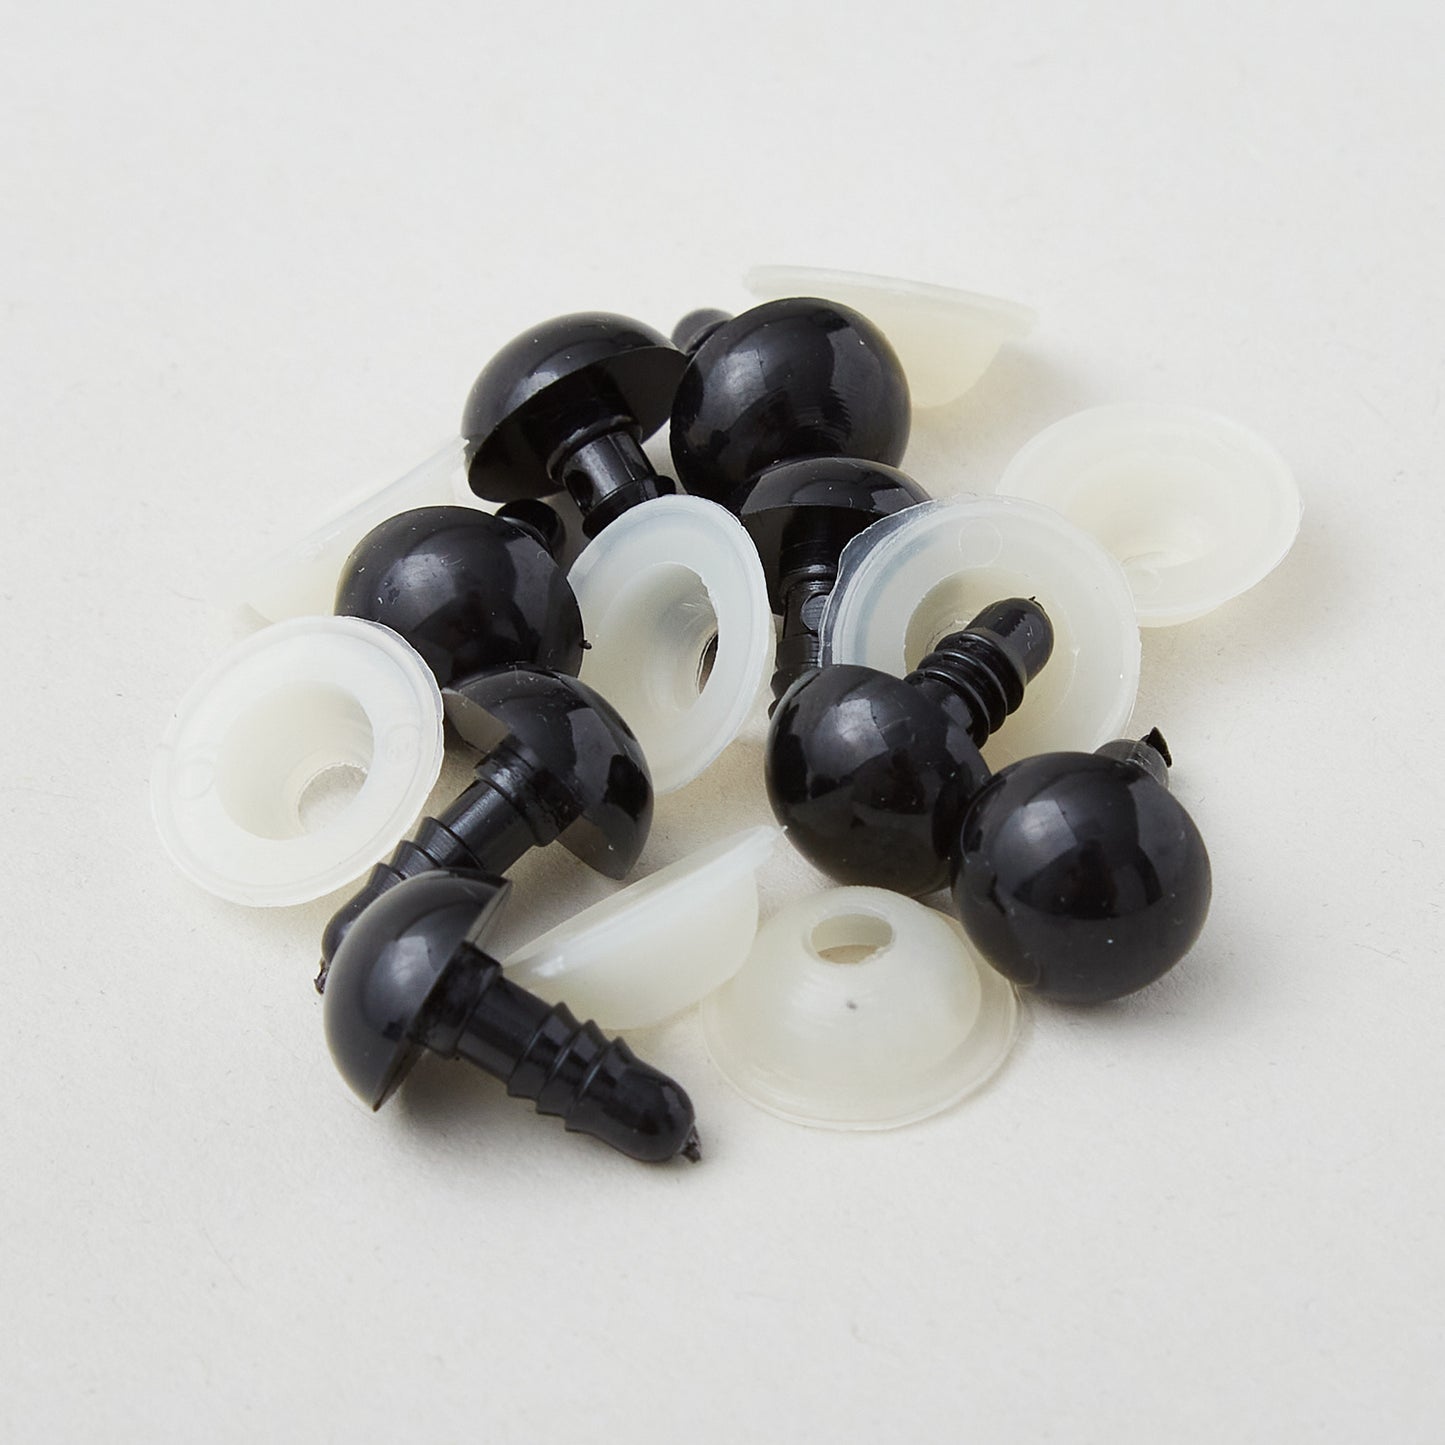 Plastic Safety Eyes - 12mm Black - 4 Pairs Primary Image